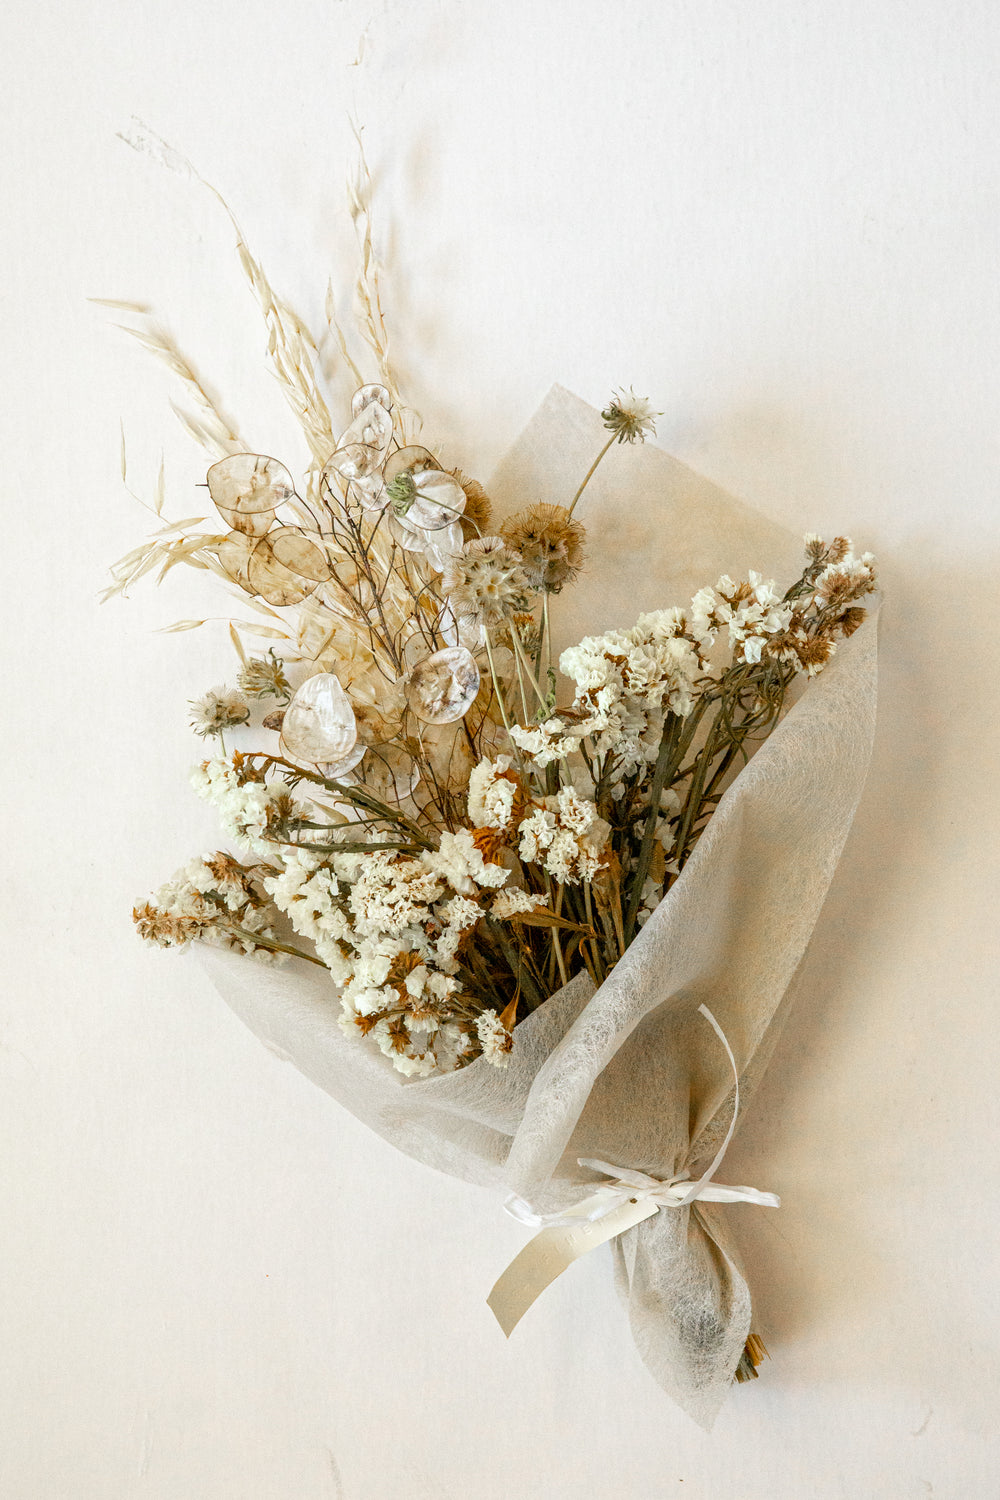 Large Summer Meadow Dried Rawfinery Bouquet